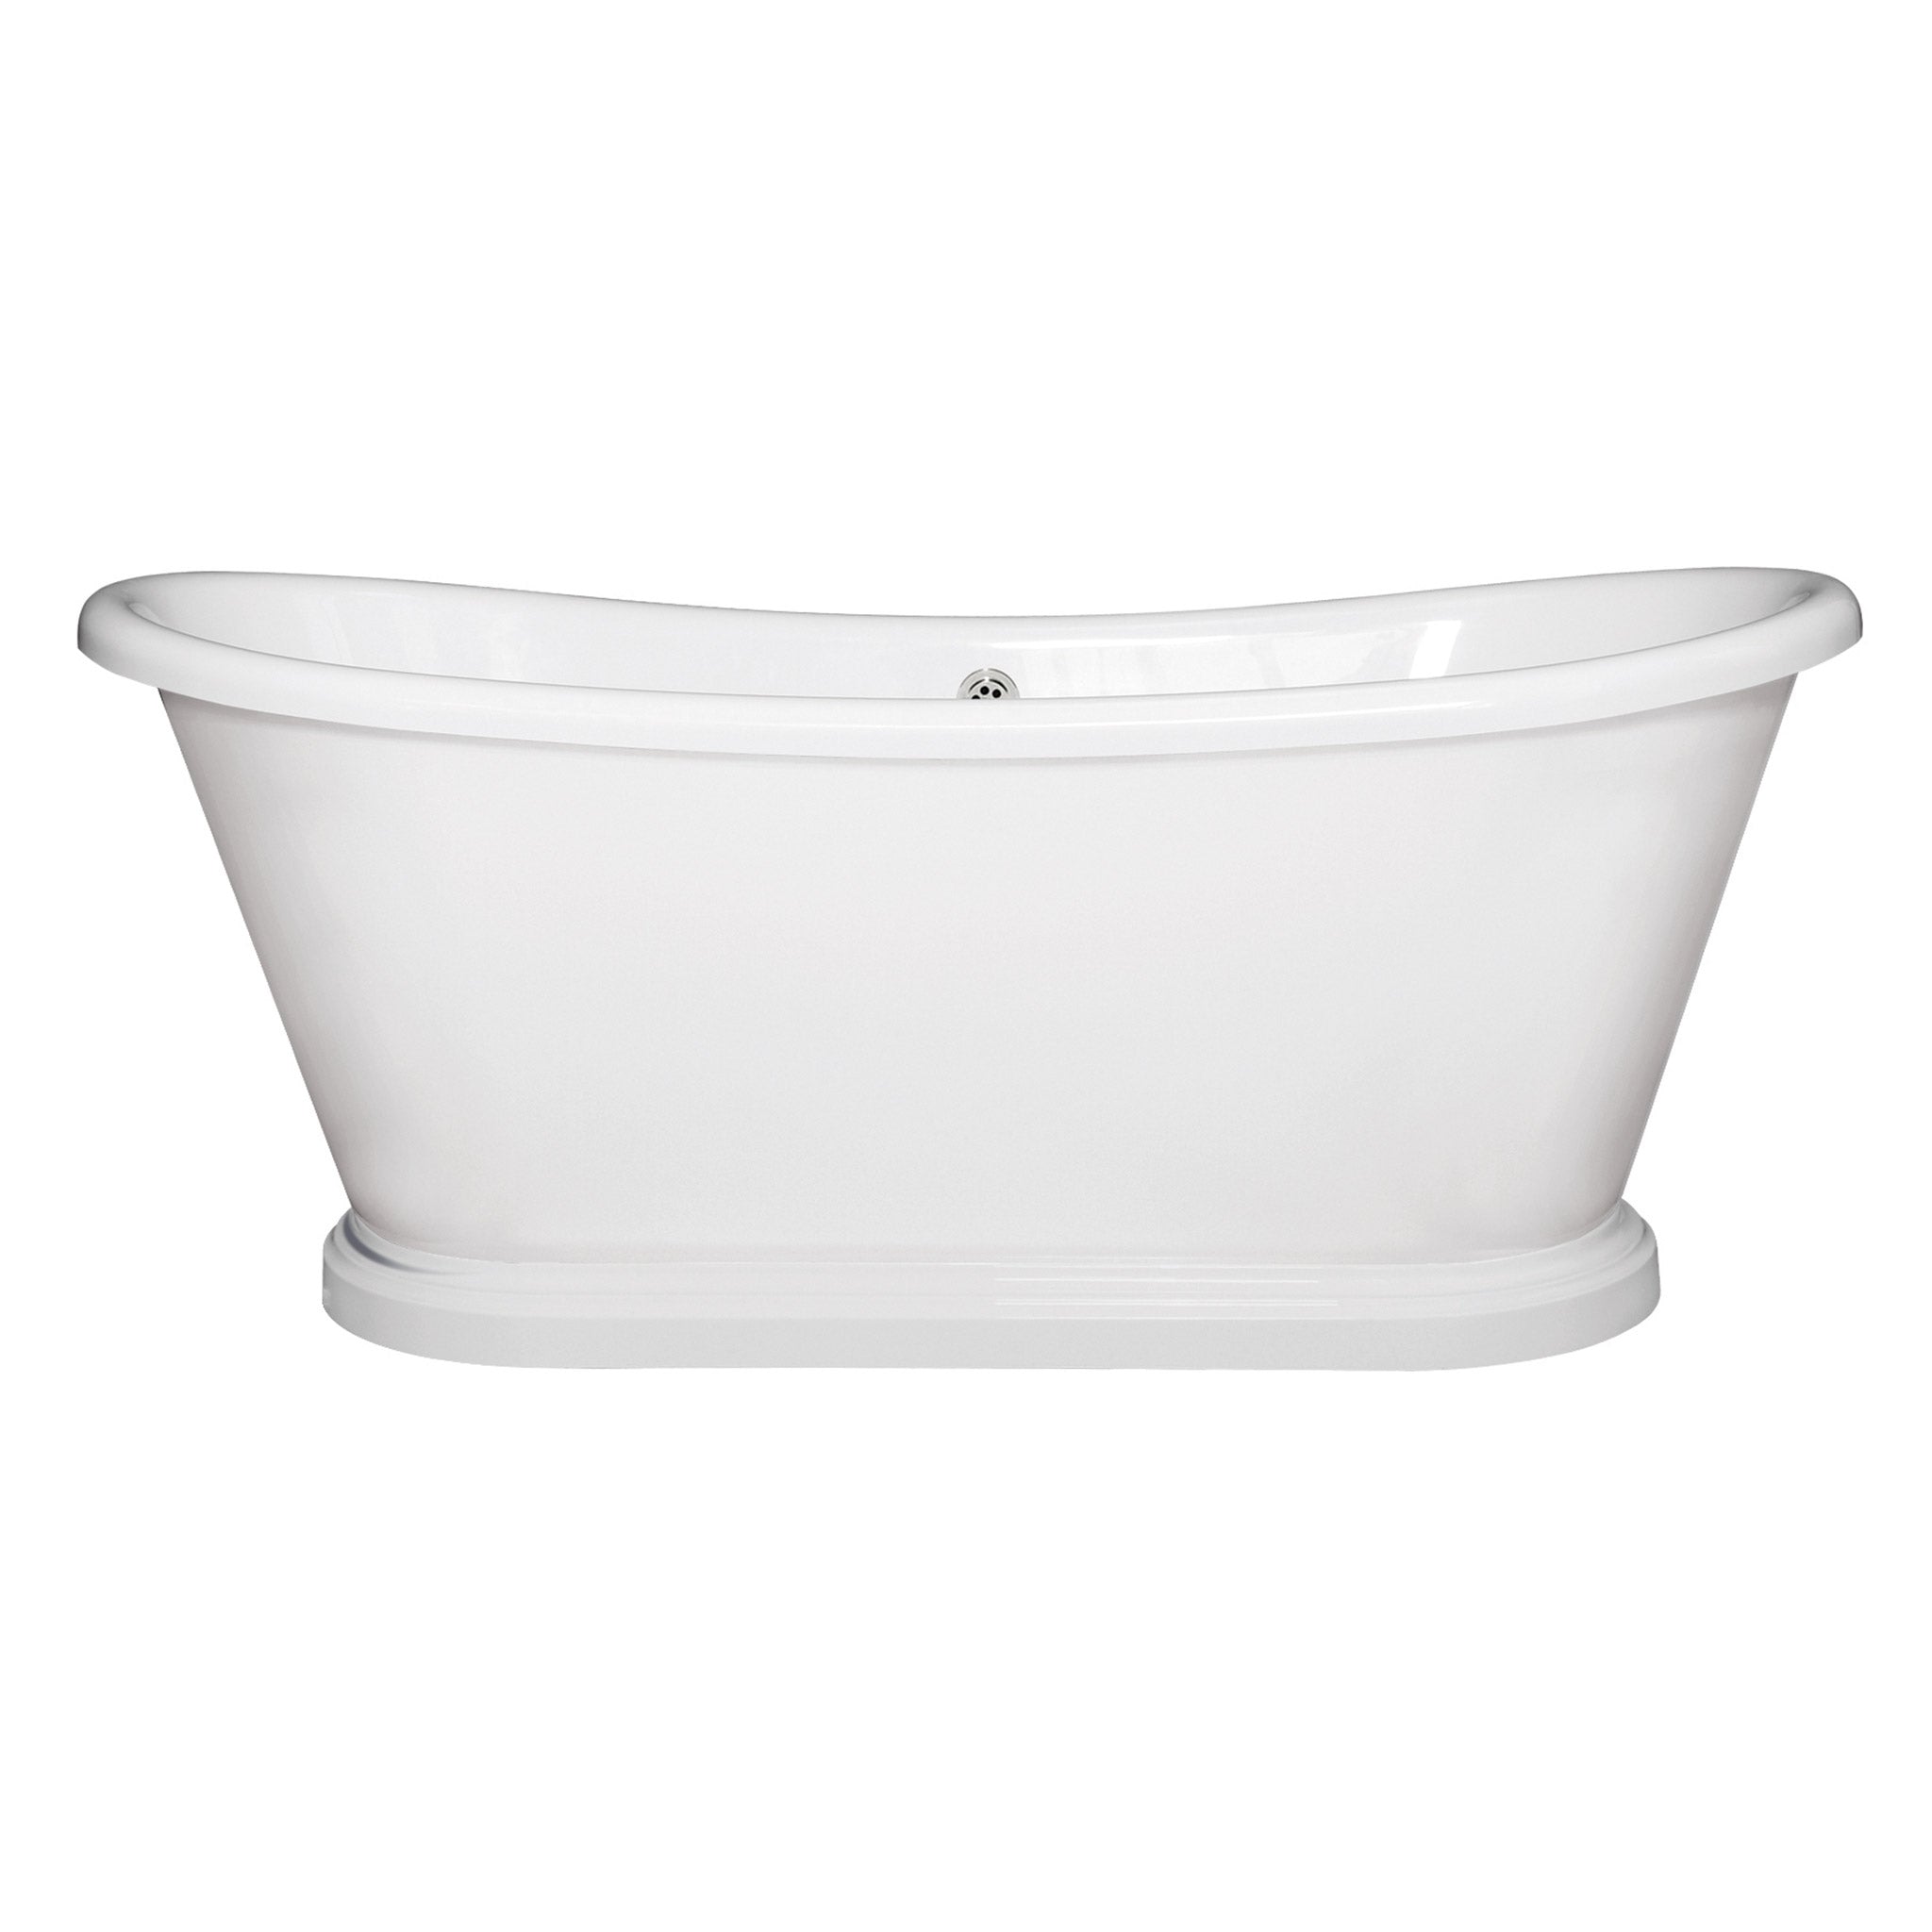 BC Designs Acrylic The Boat Double Ended Roll Top Bath